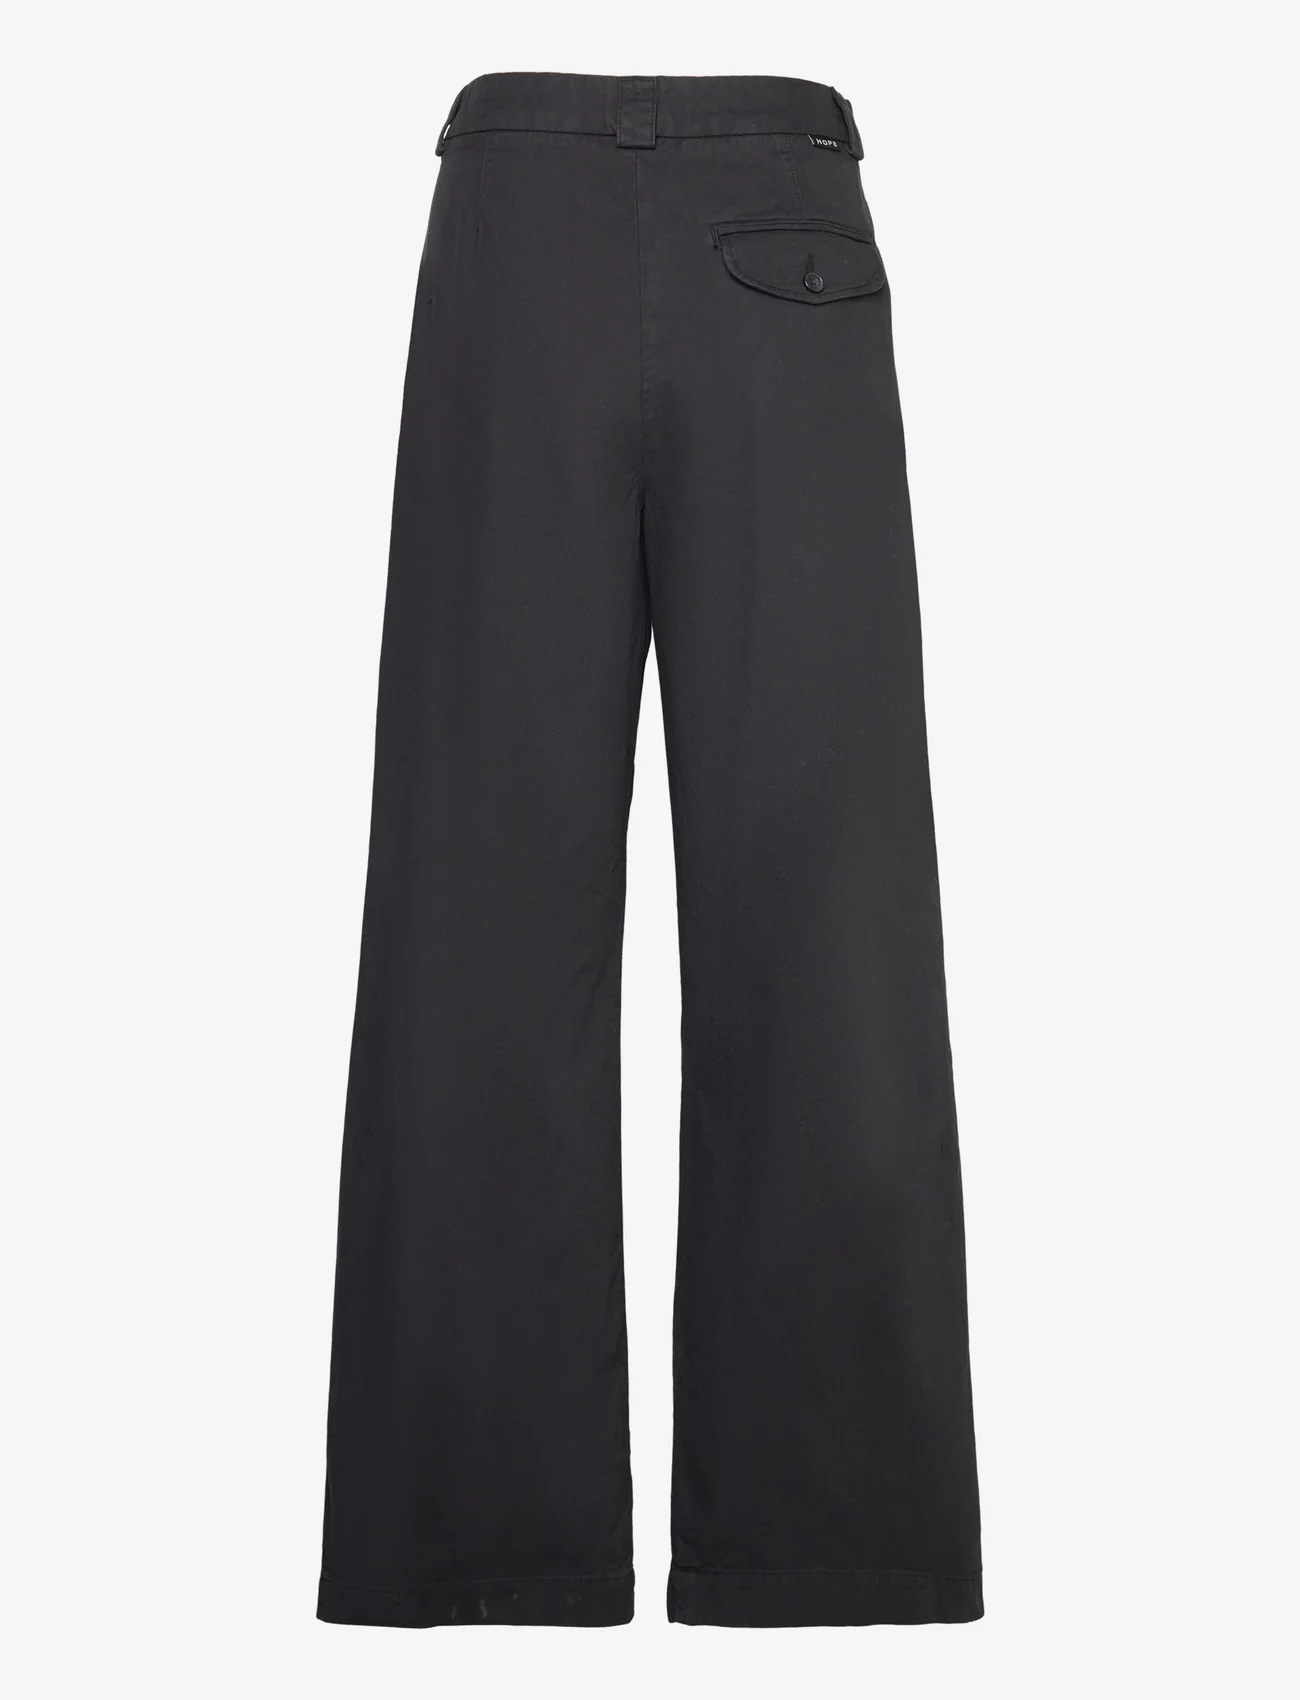 Hope - Relaxed Pleated Chinos - chinot - faded black chino - 1